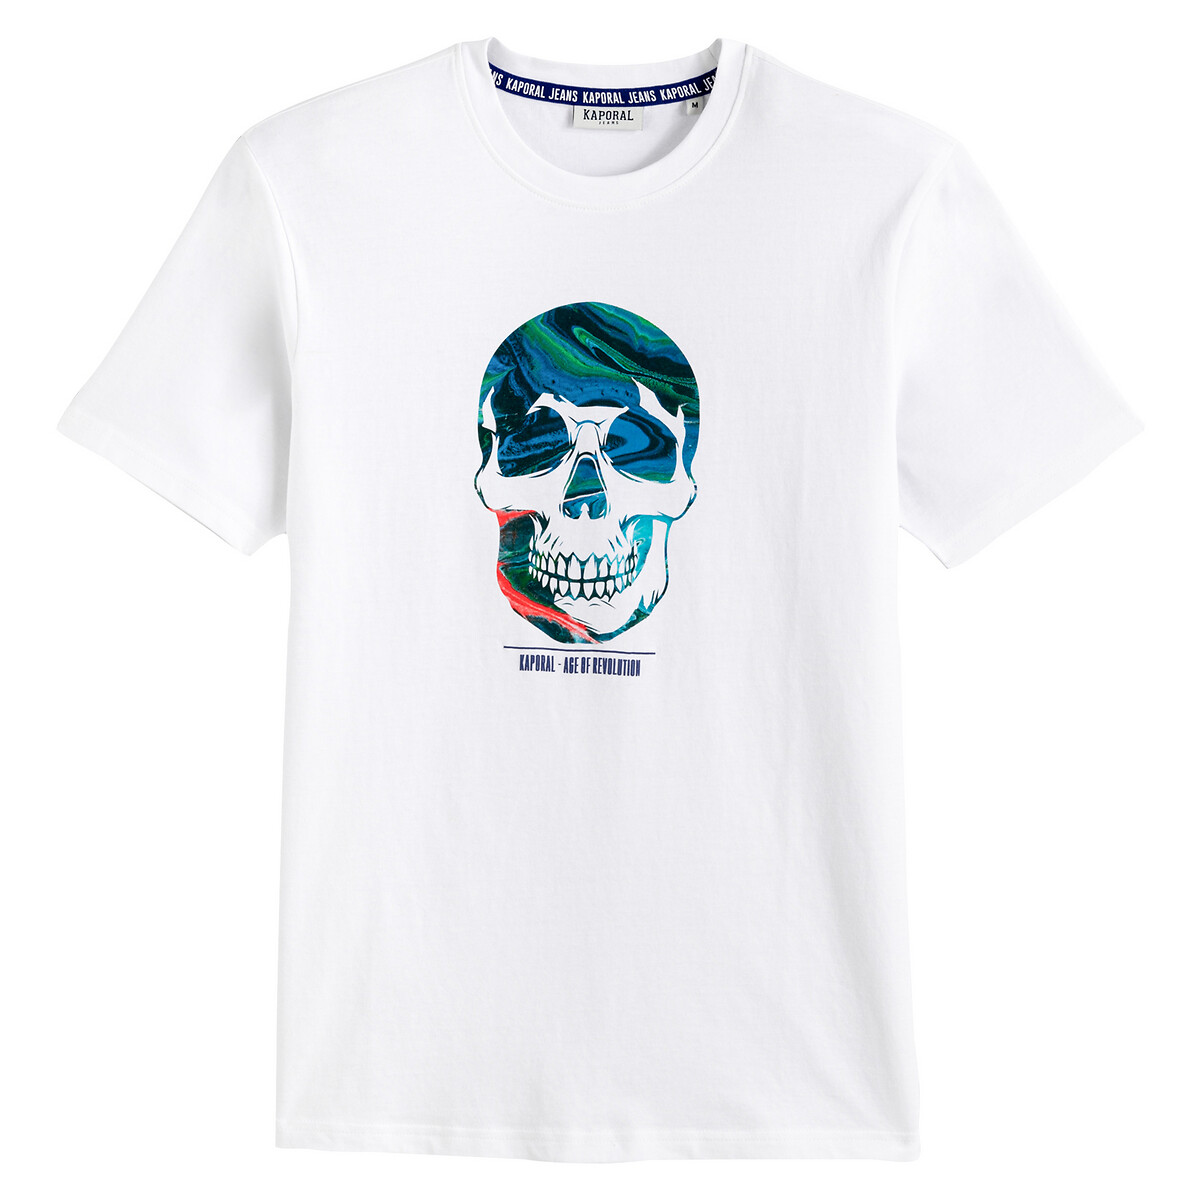 Barm Cotton Skull T-Shirt with Crew-Neck